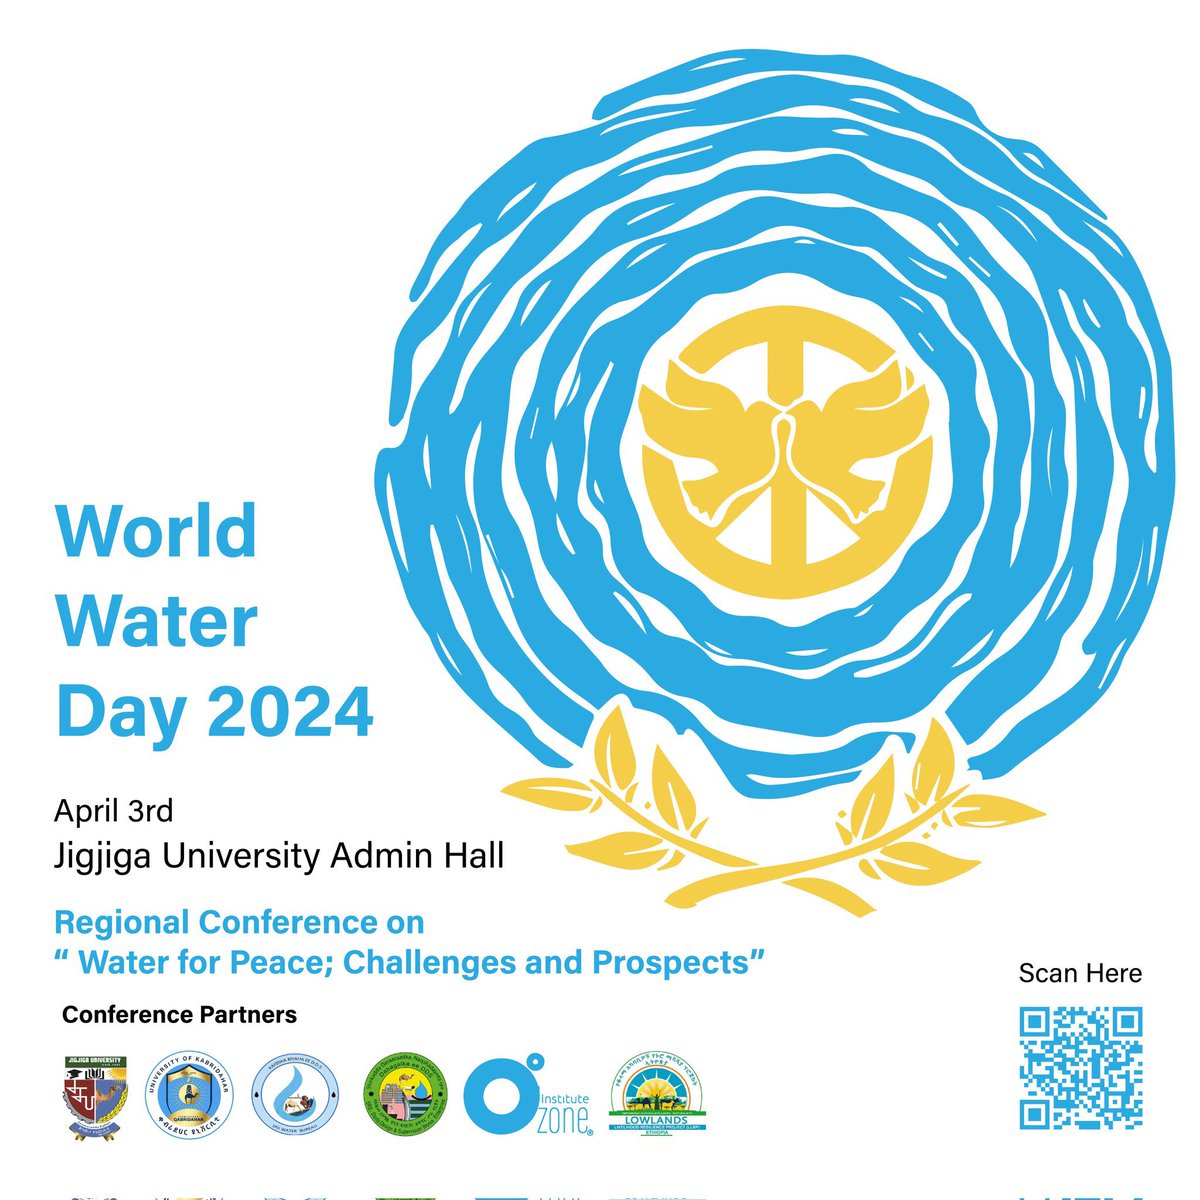 Join us for the World Water Day 2024 Regional Conference on 'Water for Peace: Challenges and Prospects' at Jigjiga University! 🌍 Organizd by @ozoneinstitute and @jigjigauniveth

🗓️ Date: 3rd April, 2024 8:30 AM
📍 Location: Jigjiga University

#WorldWaterDay #WaterForPeace